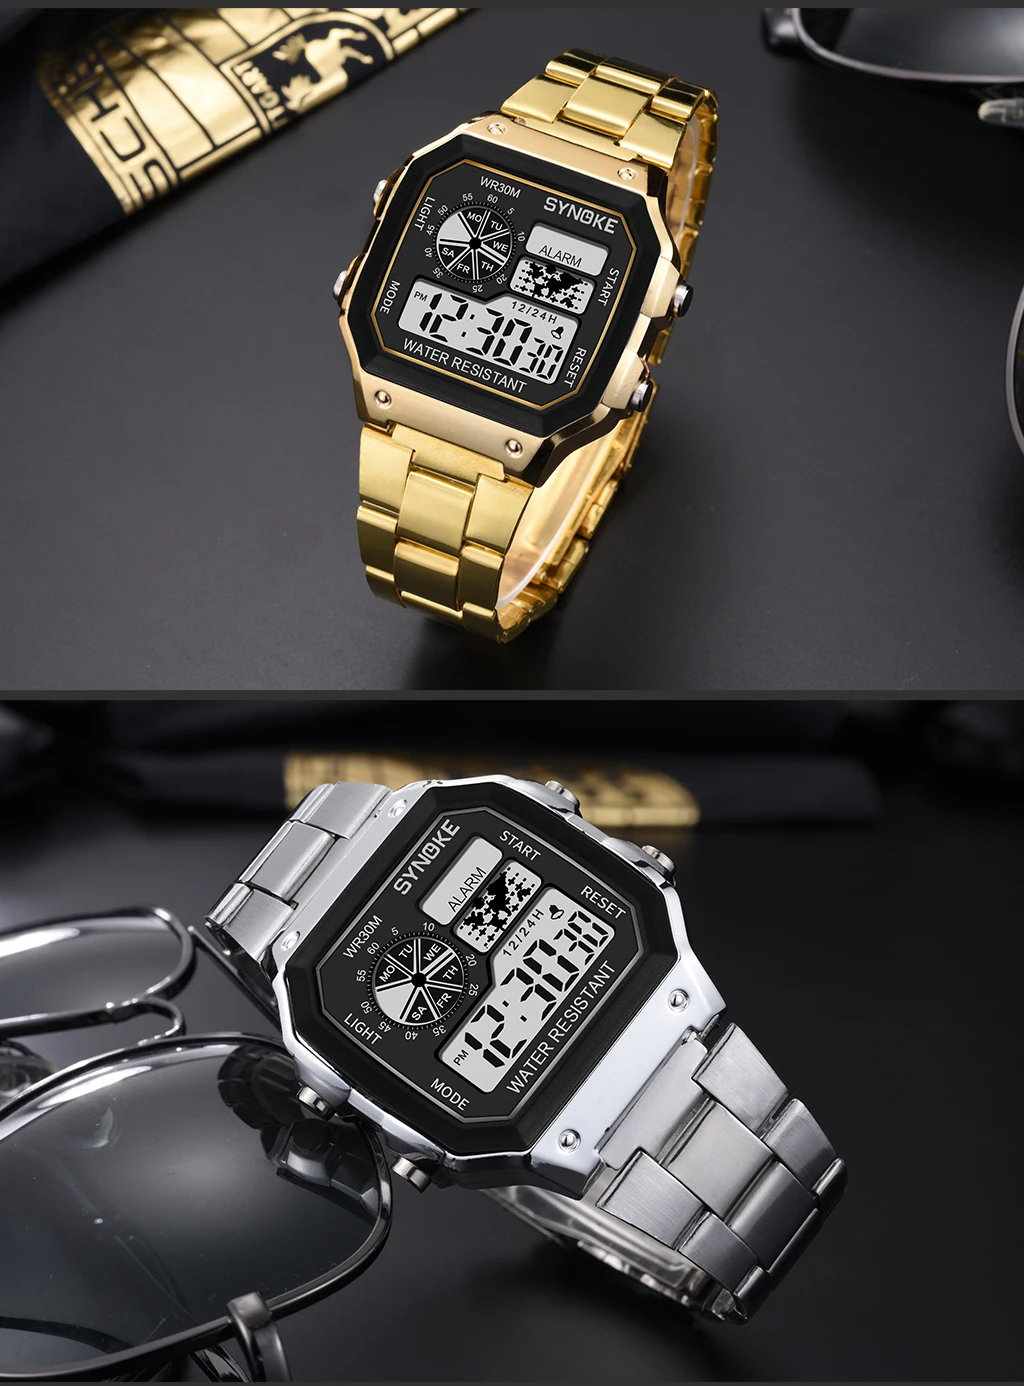 Square Digital Watches Men Top Brand Luxury LED Alarm Military Business Wristwatch Man Waterproof Electronic Sport Watch For Men